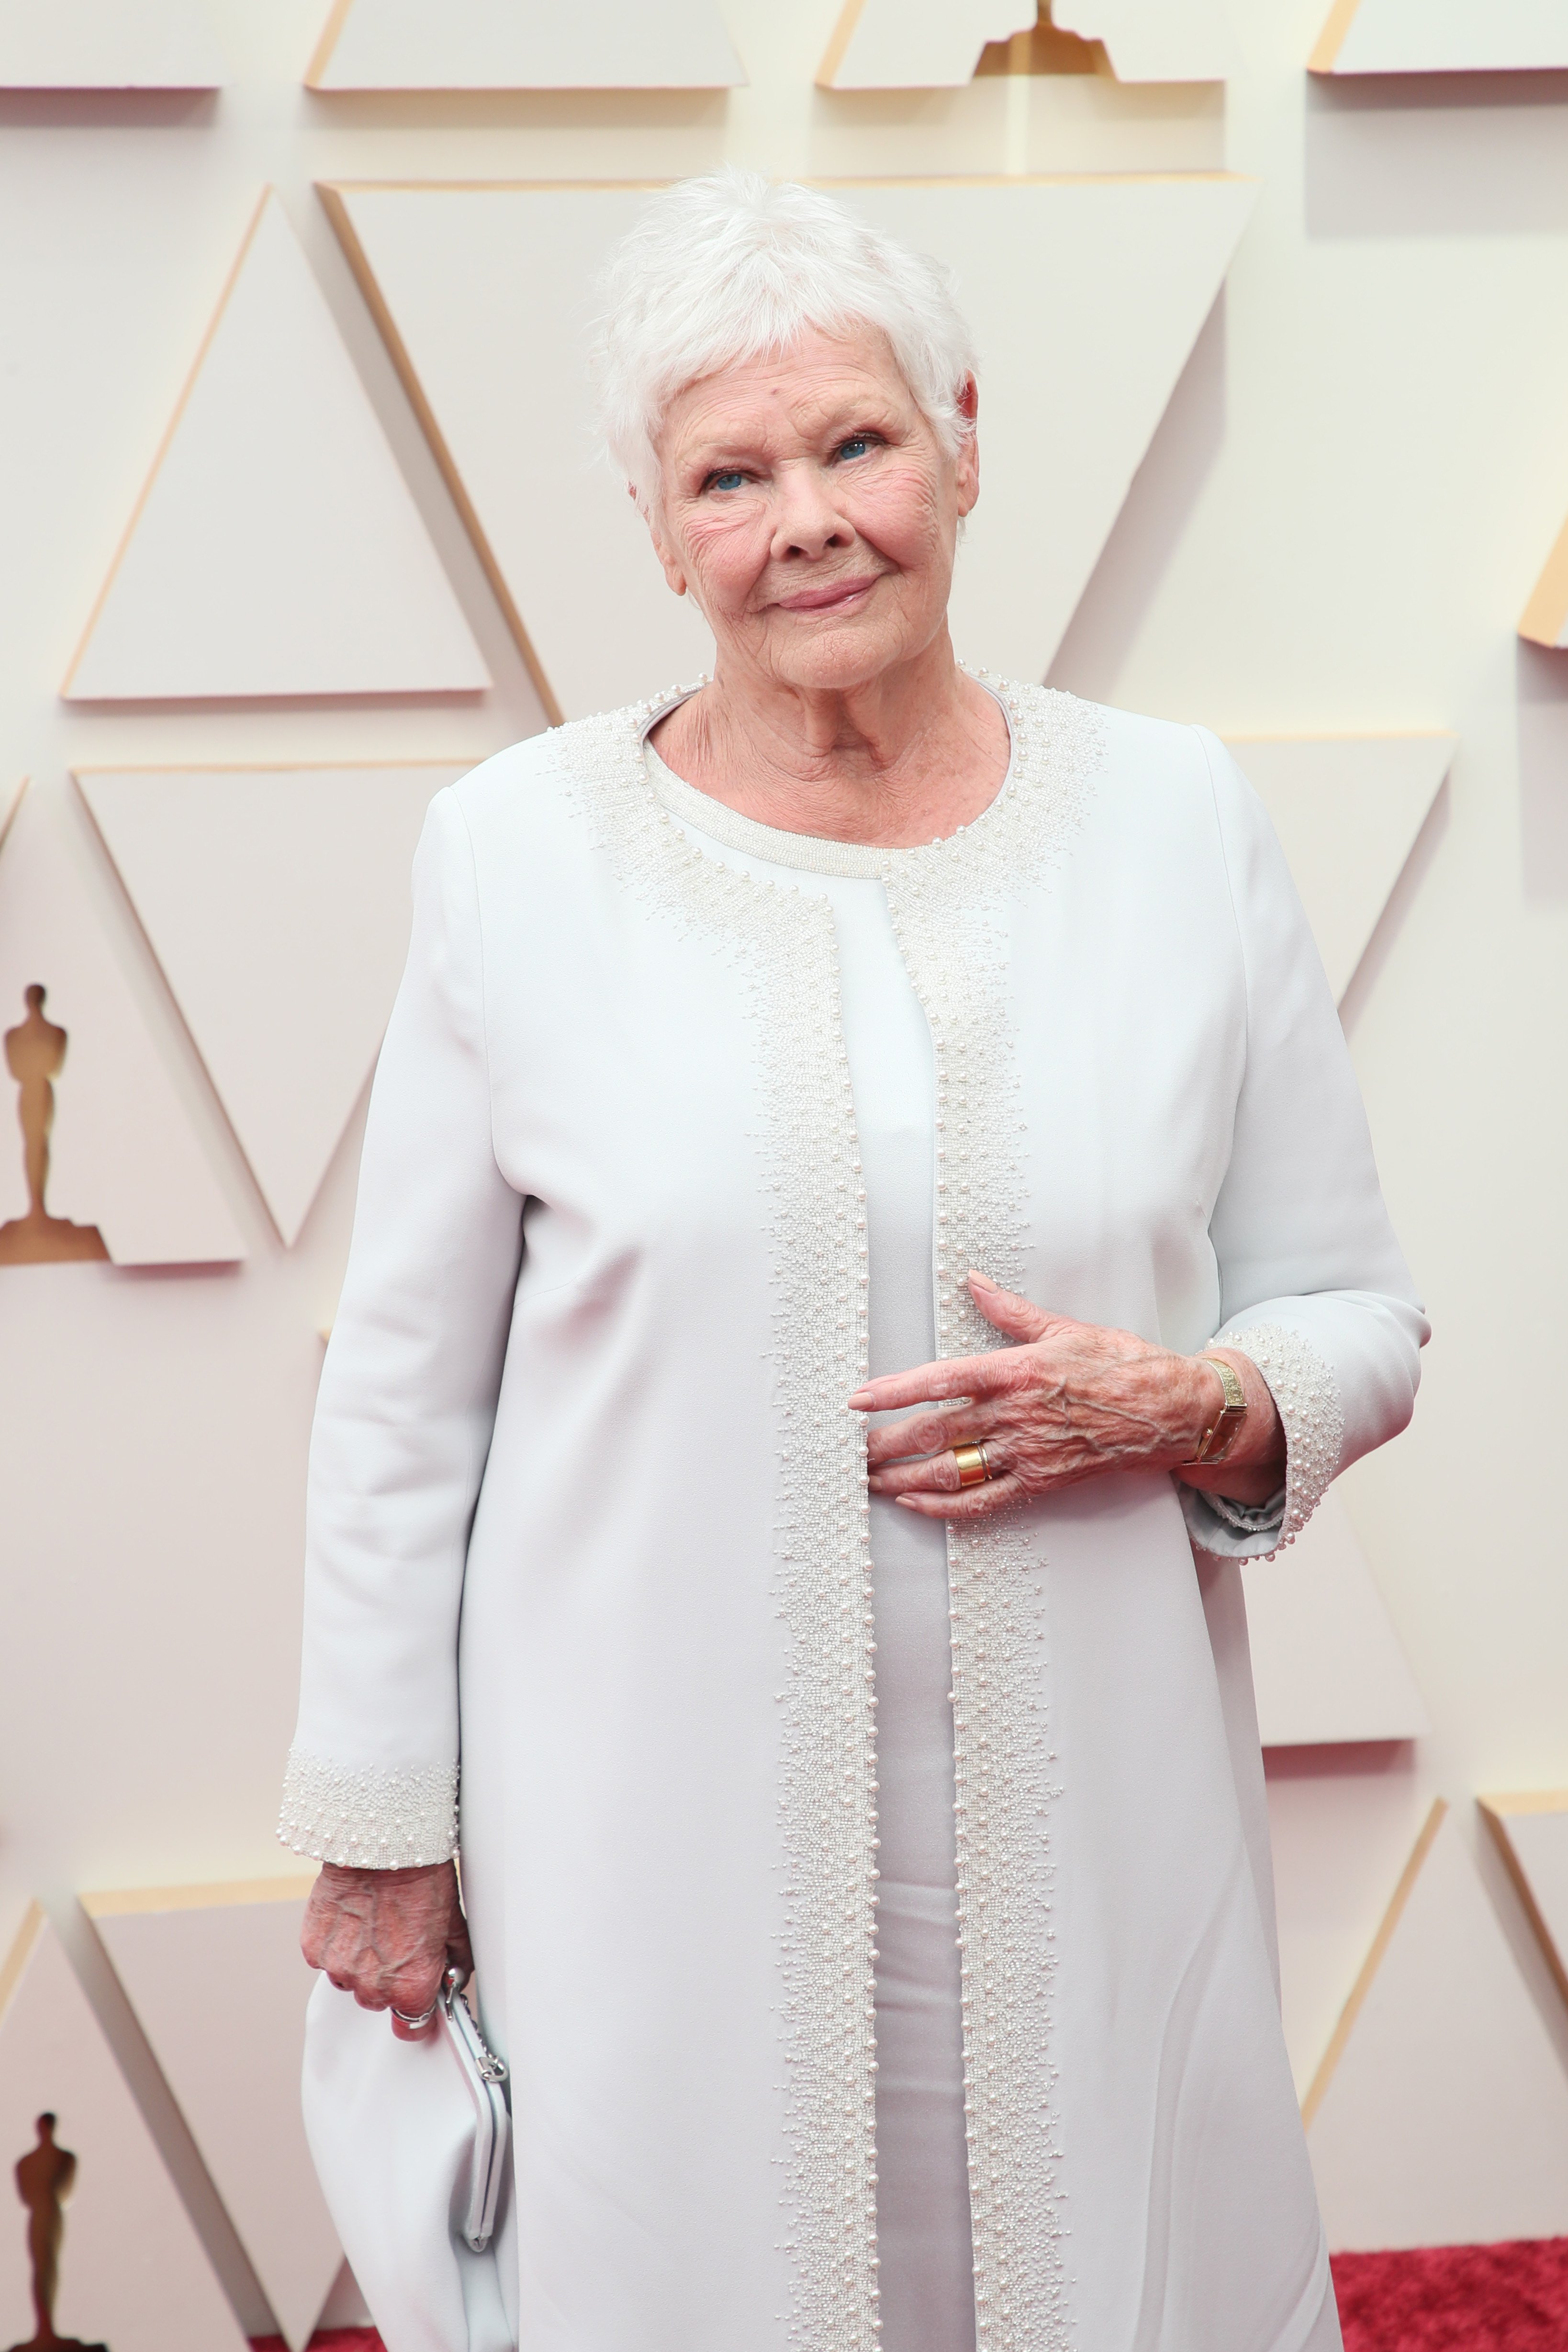 Judi Dench attends the 94th Annual Academy Awards at Hollywood and Highland on March 27, 2022 in Hollywood, California. | Source: Getty Images